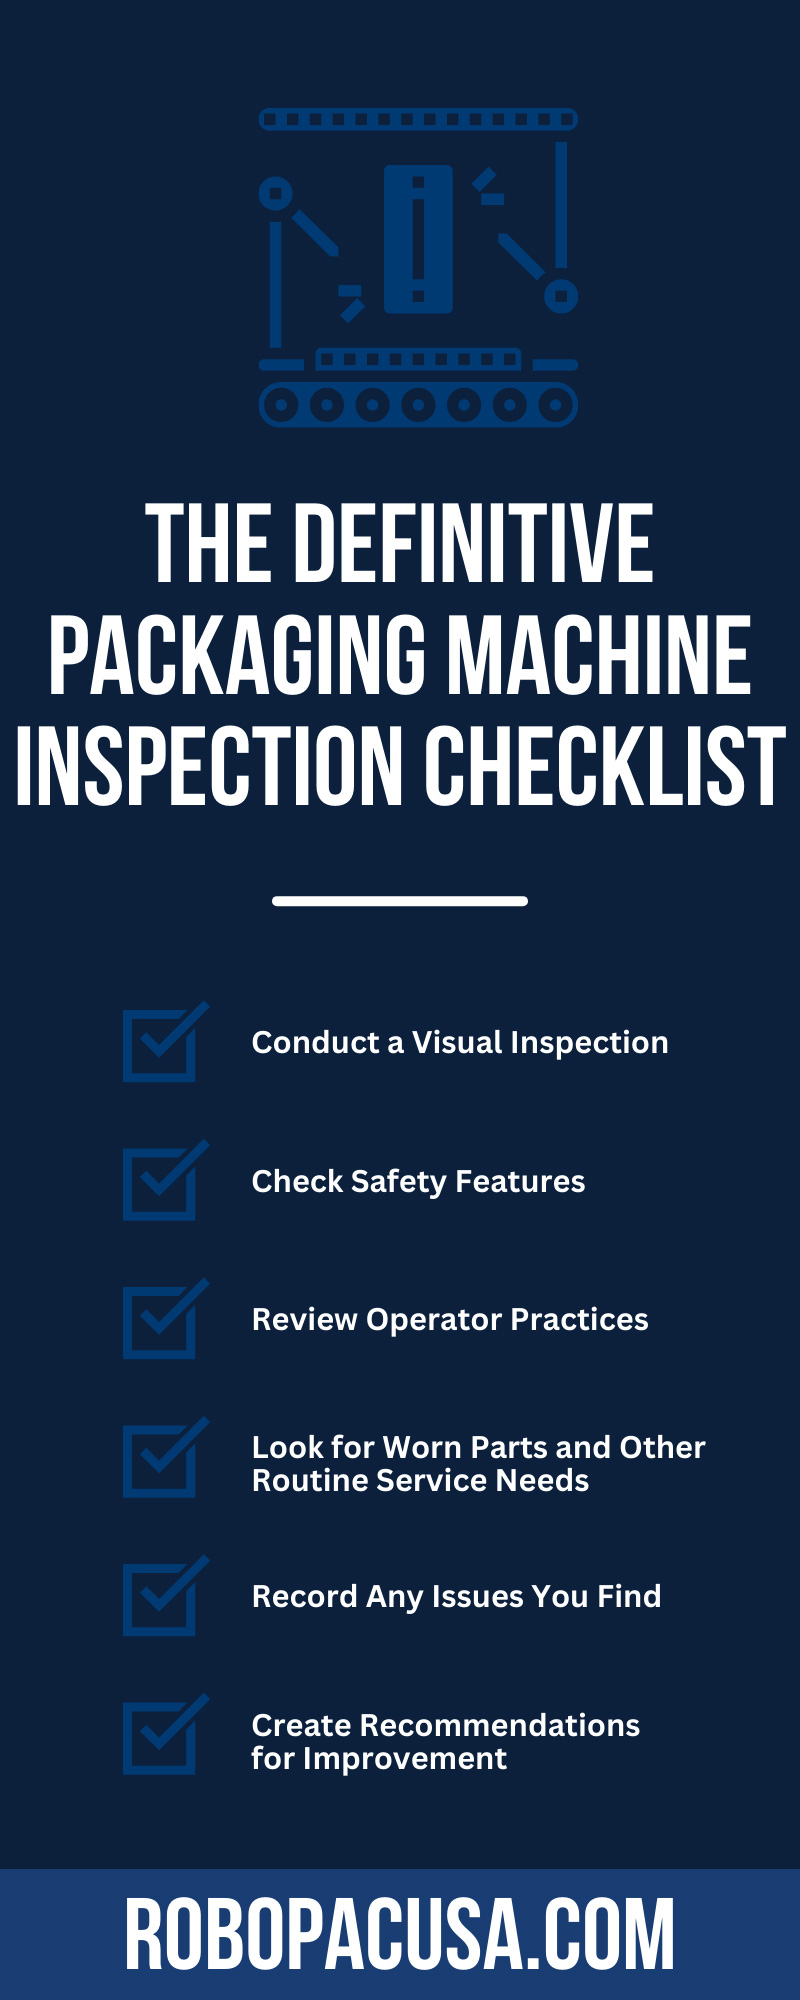 The Definitive Packaging Machine Inspection Checklist